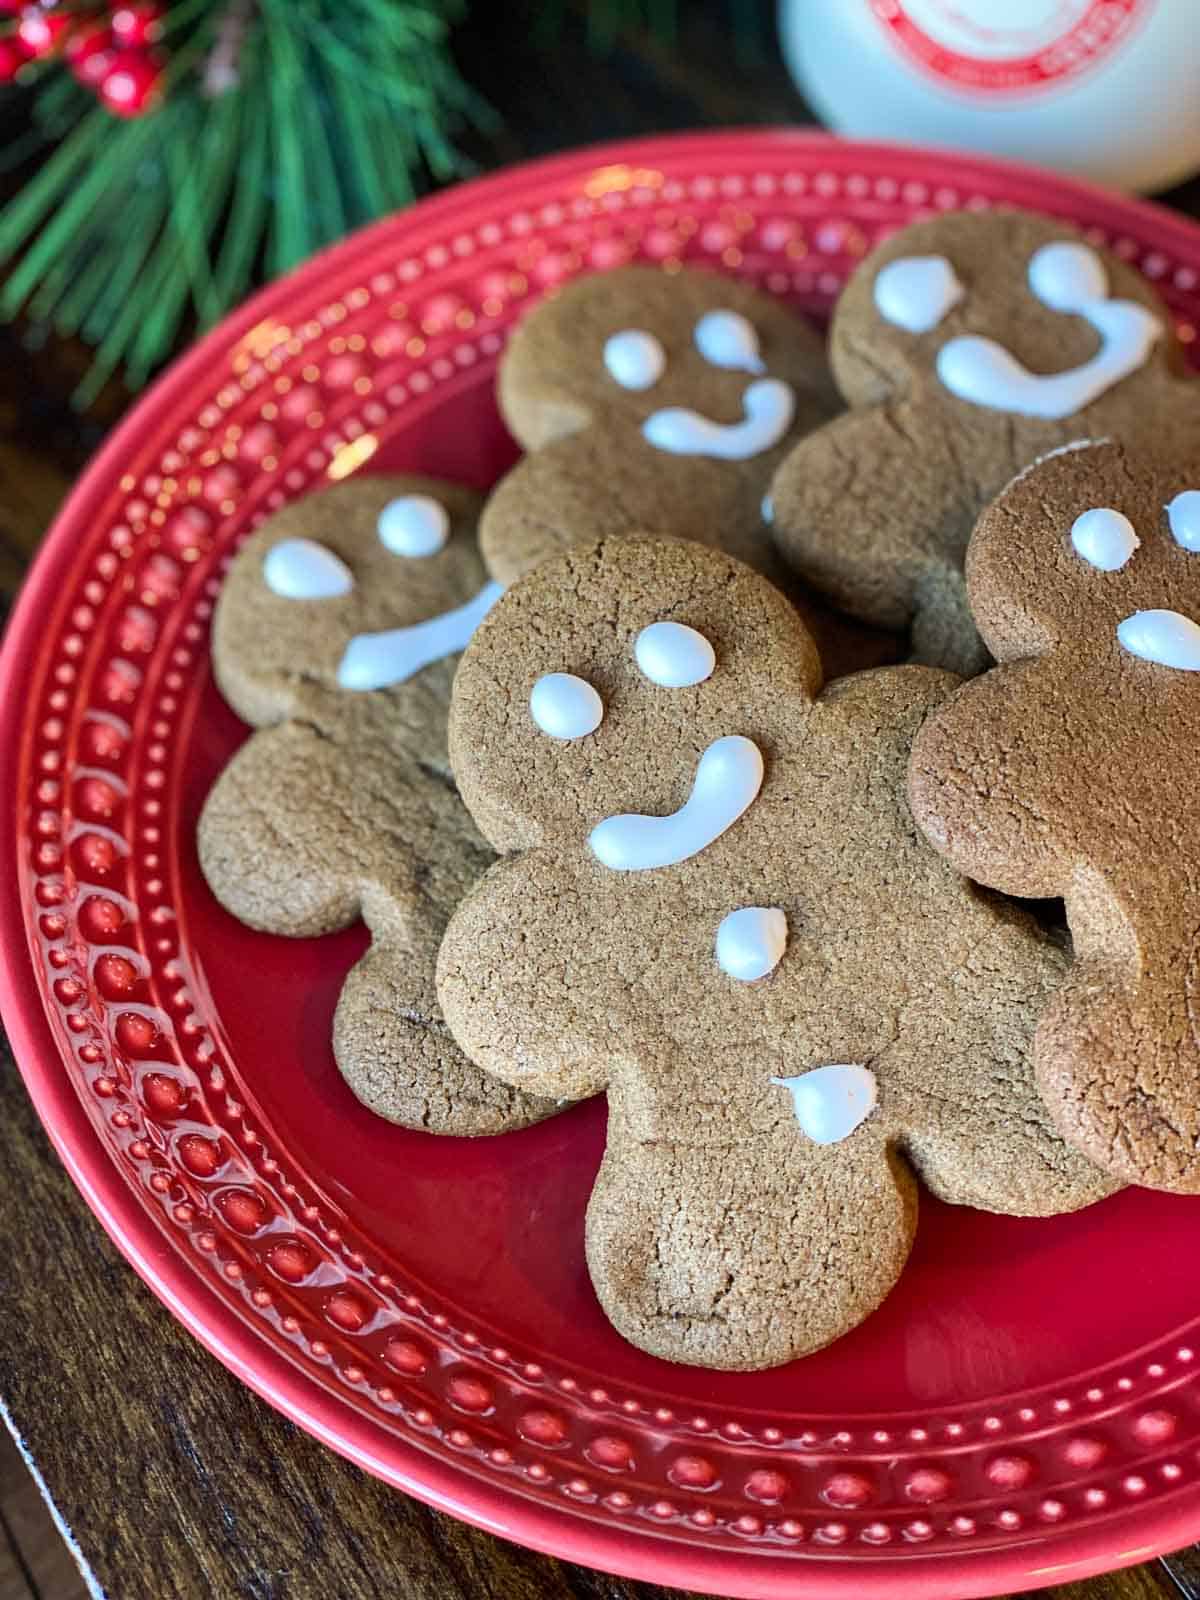 Gluten Free Gingerbread on a red plate